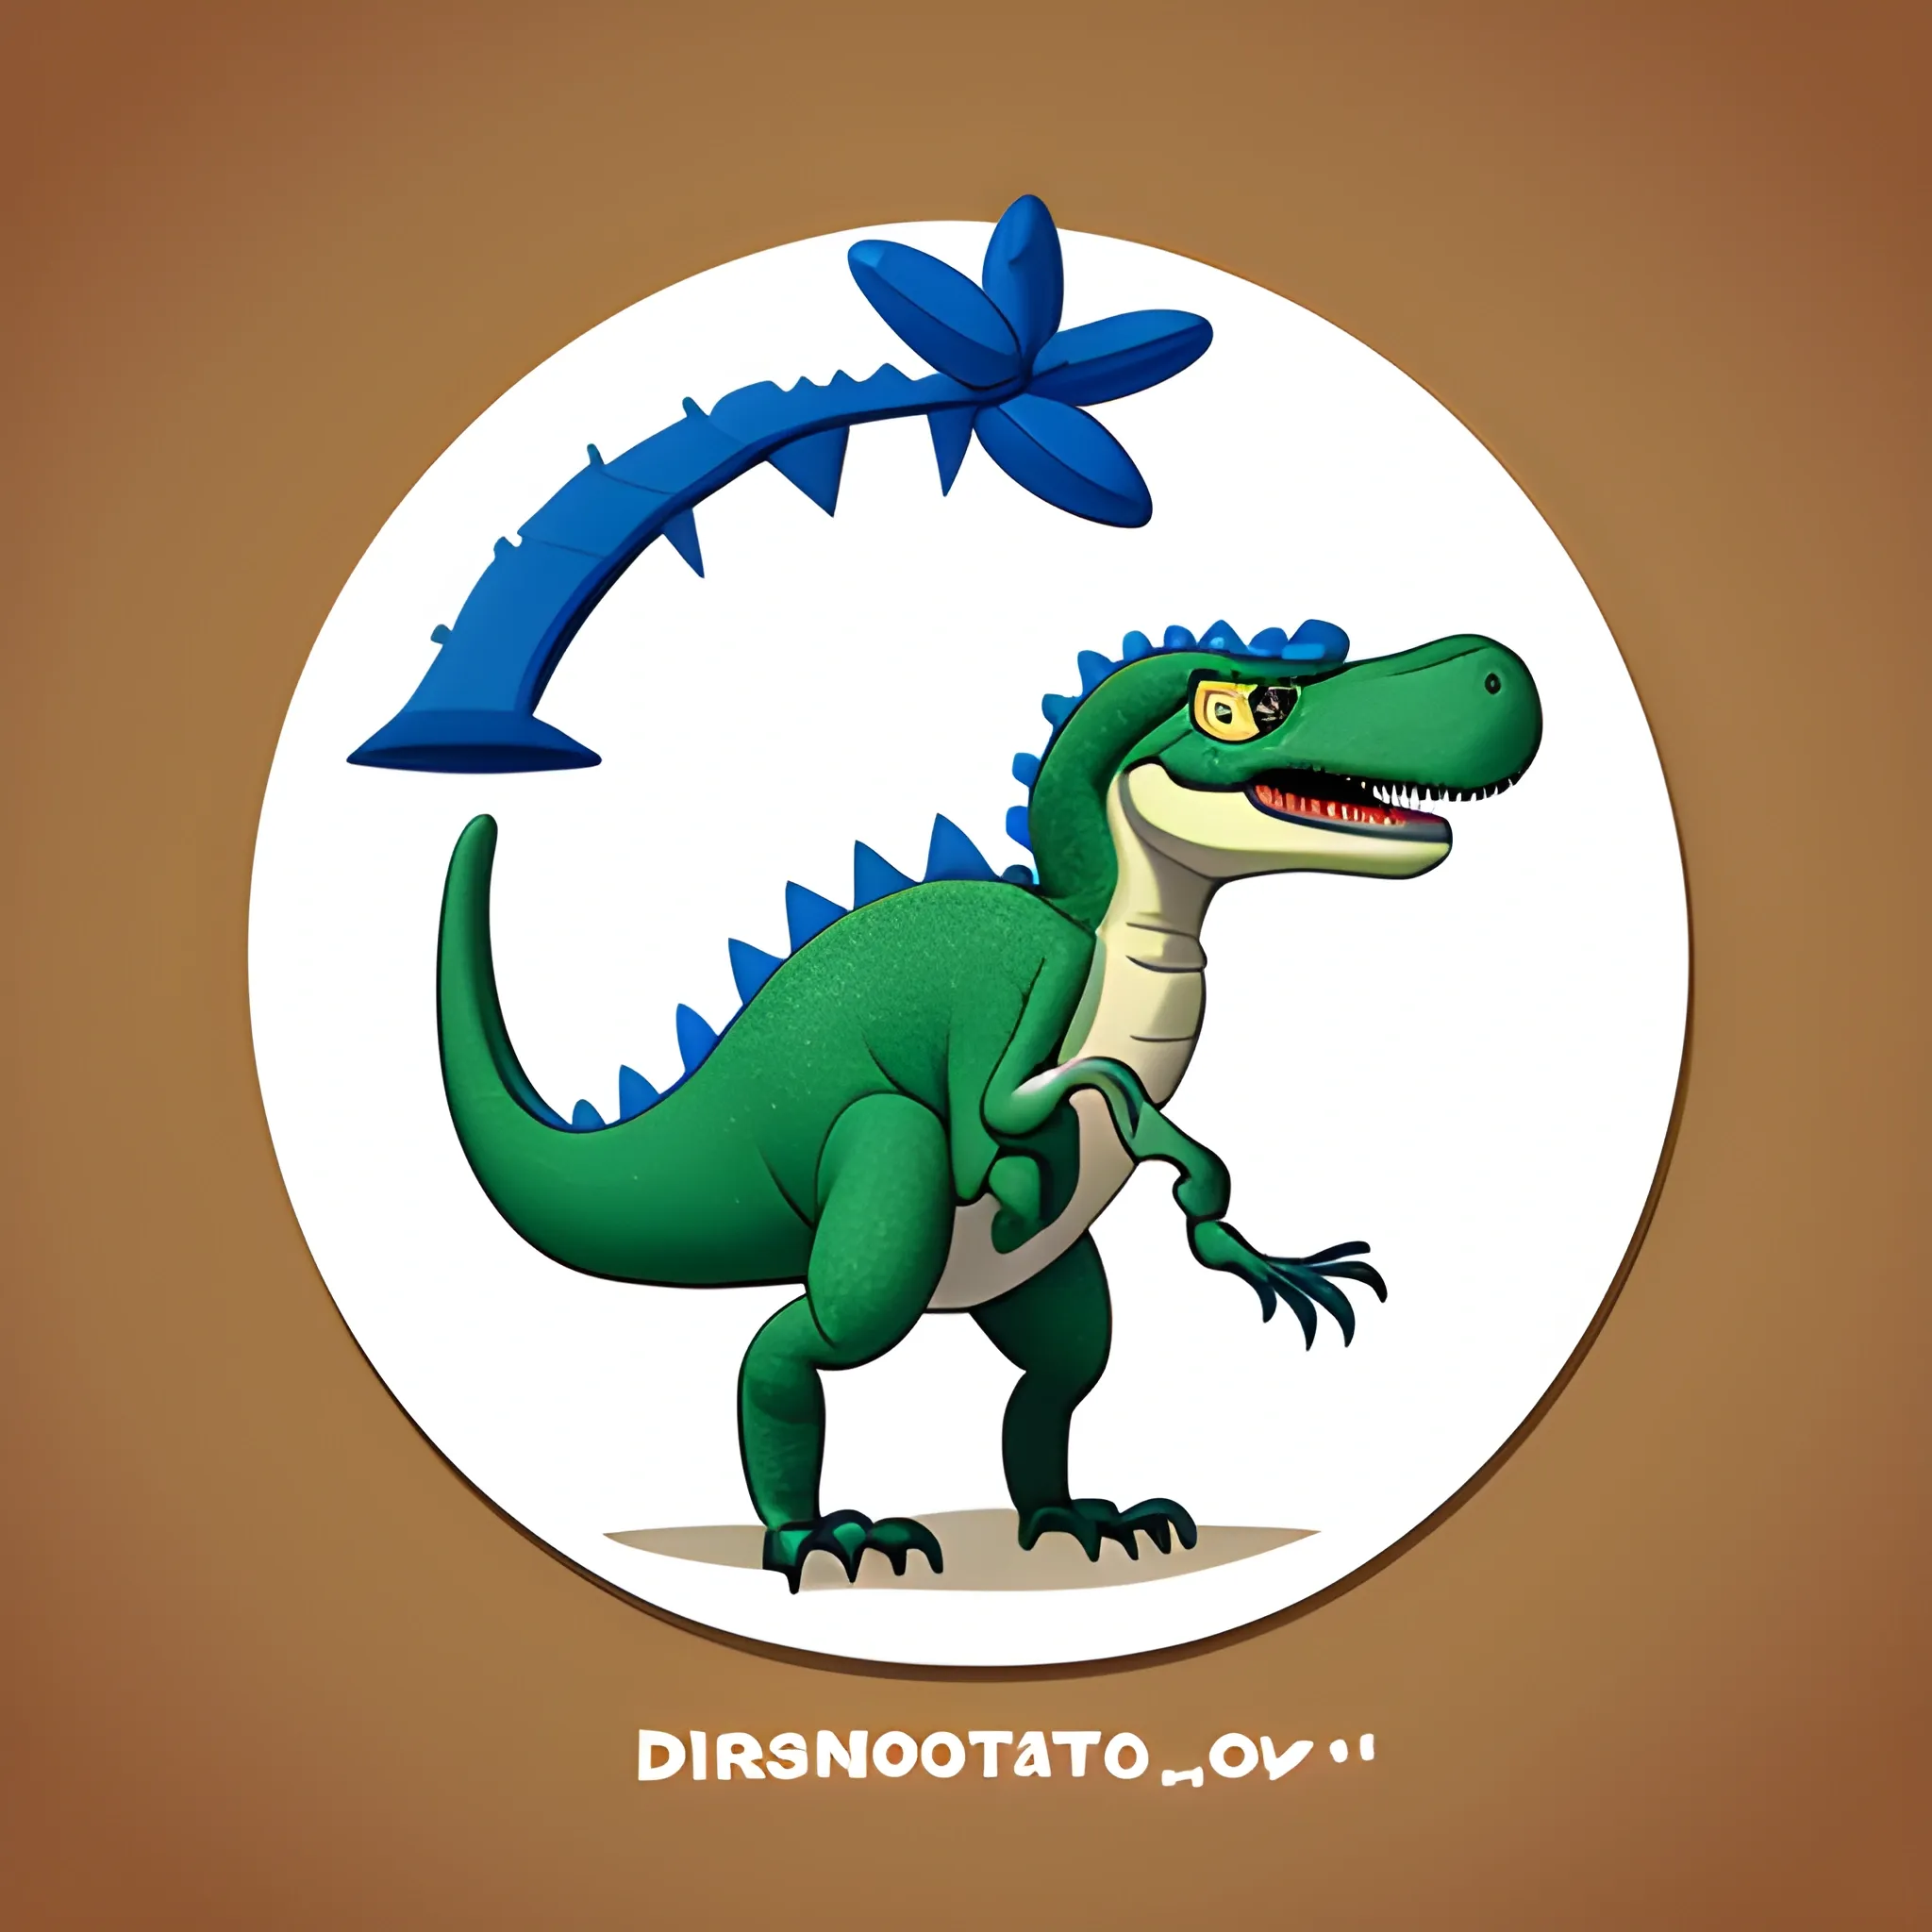 create a text-only logo with the word dinosar, Cartoon